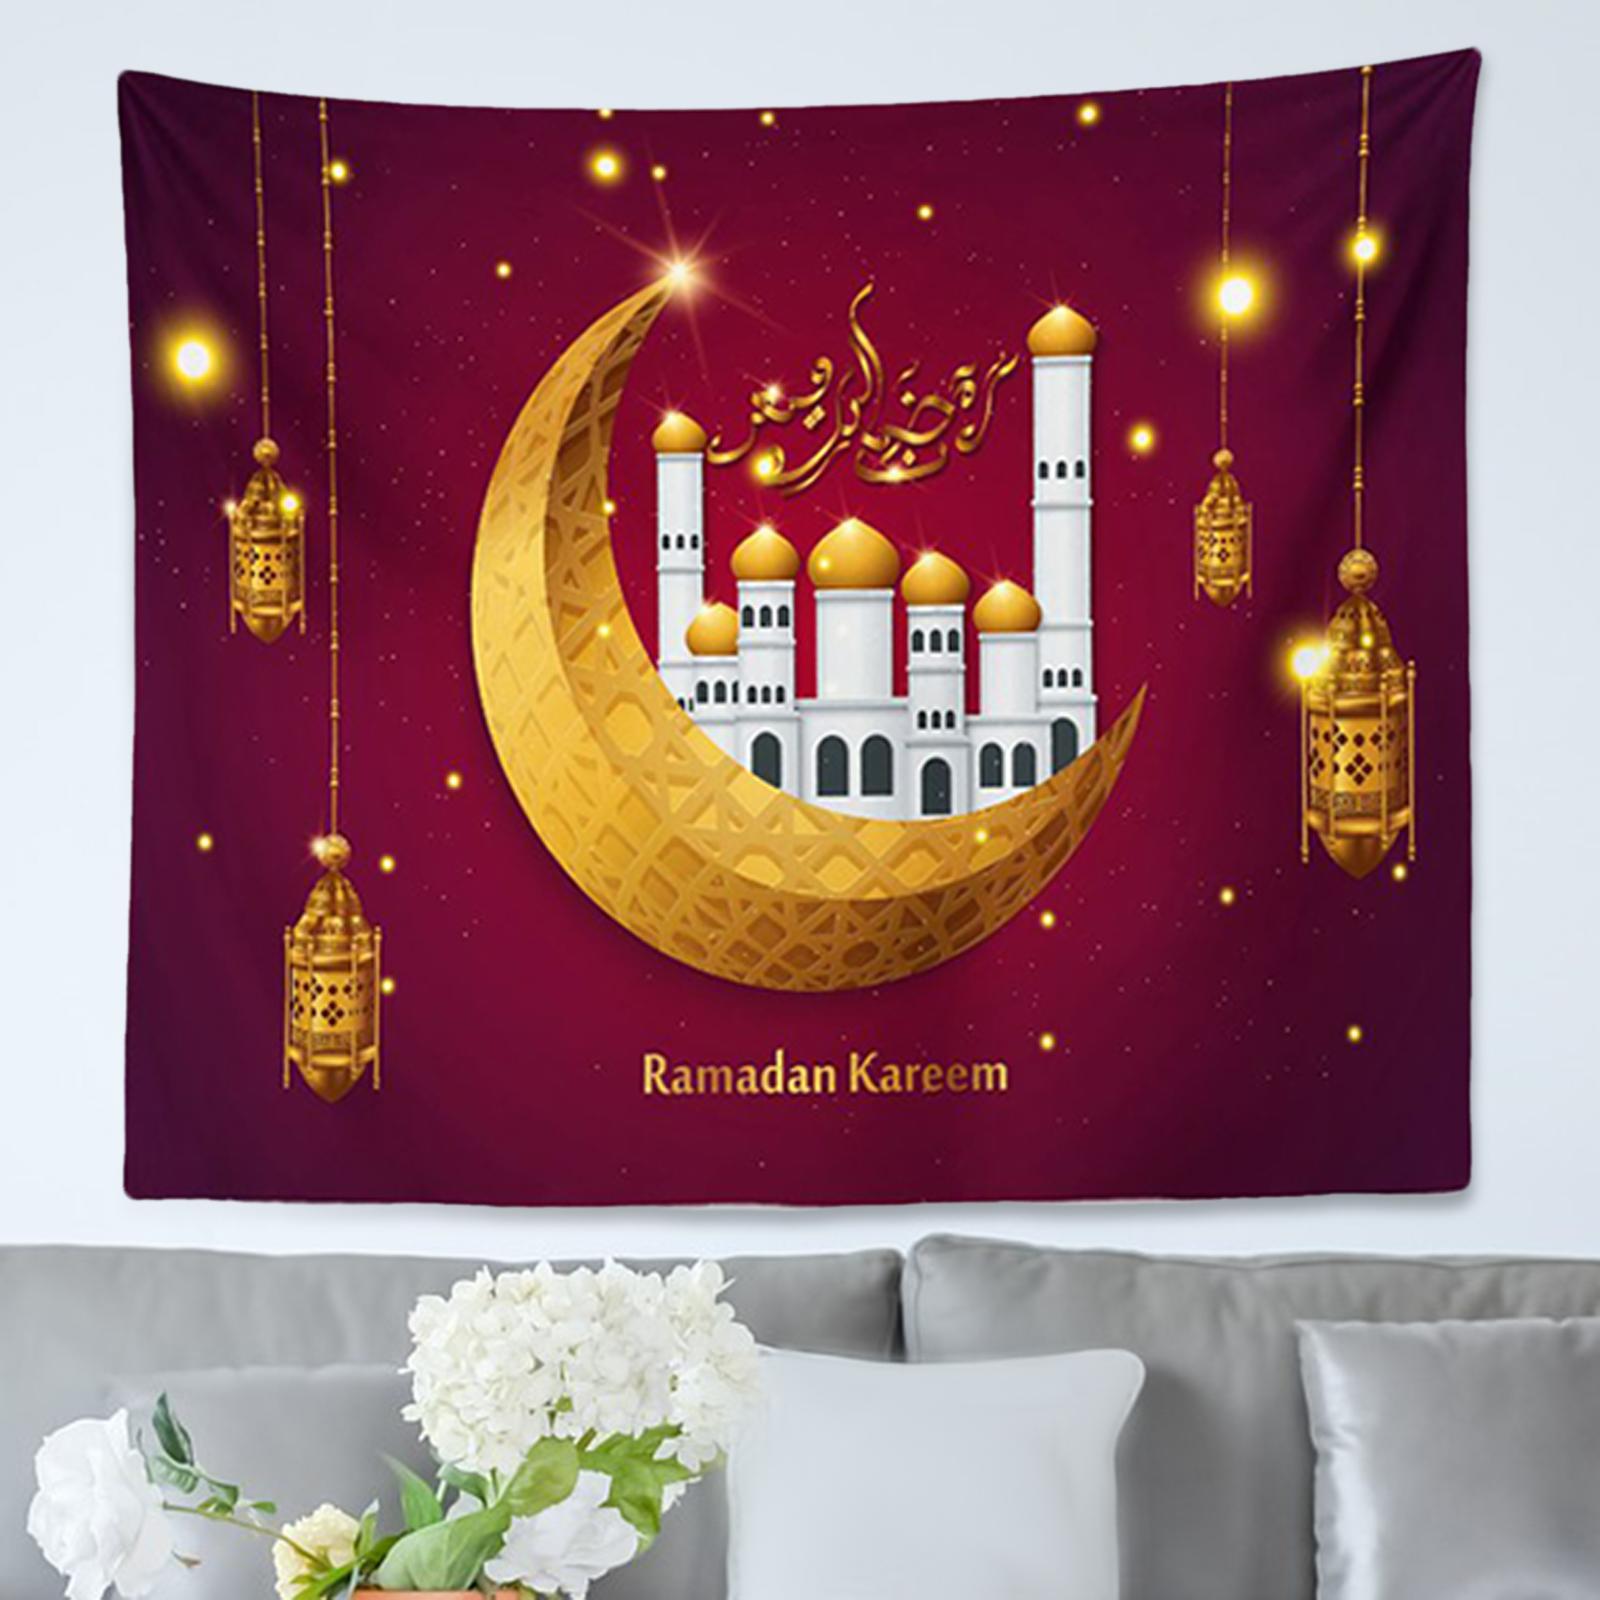 Polyester Ramadan Wall Hanging Tapestry Eid Mubarak Decor for Bedroom Home A